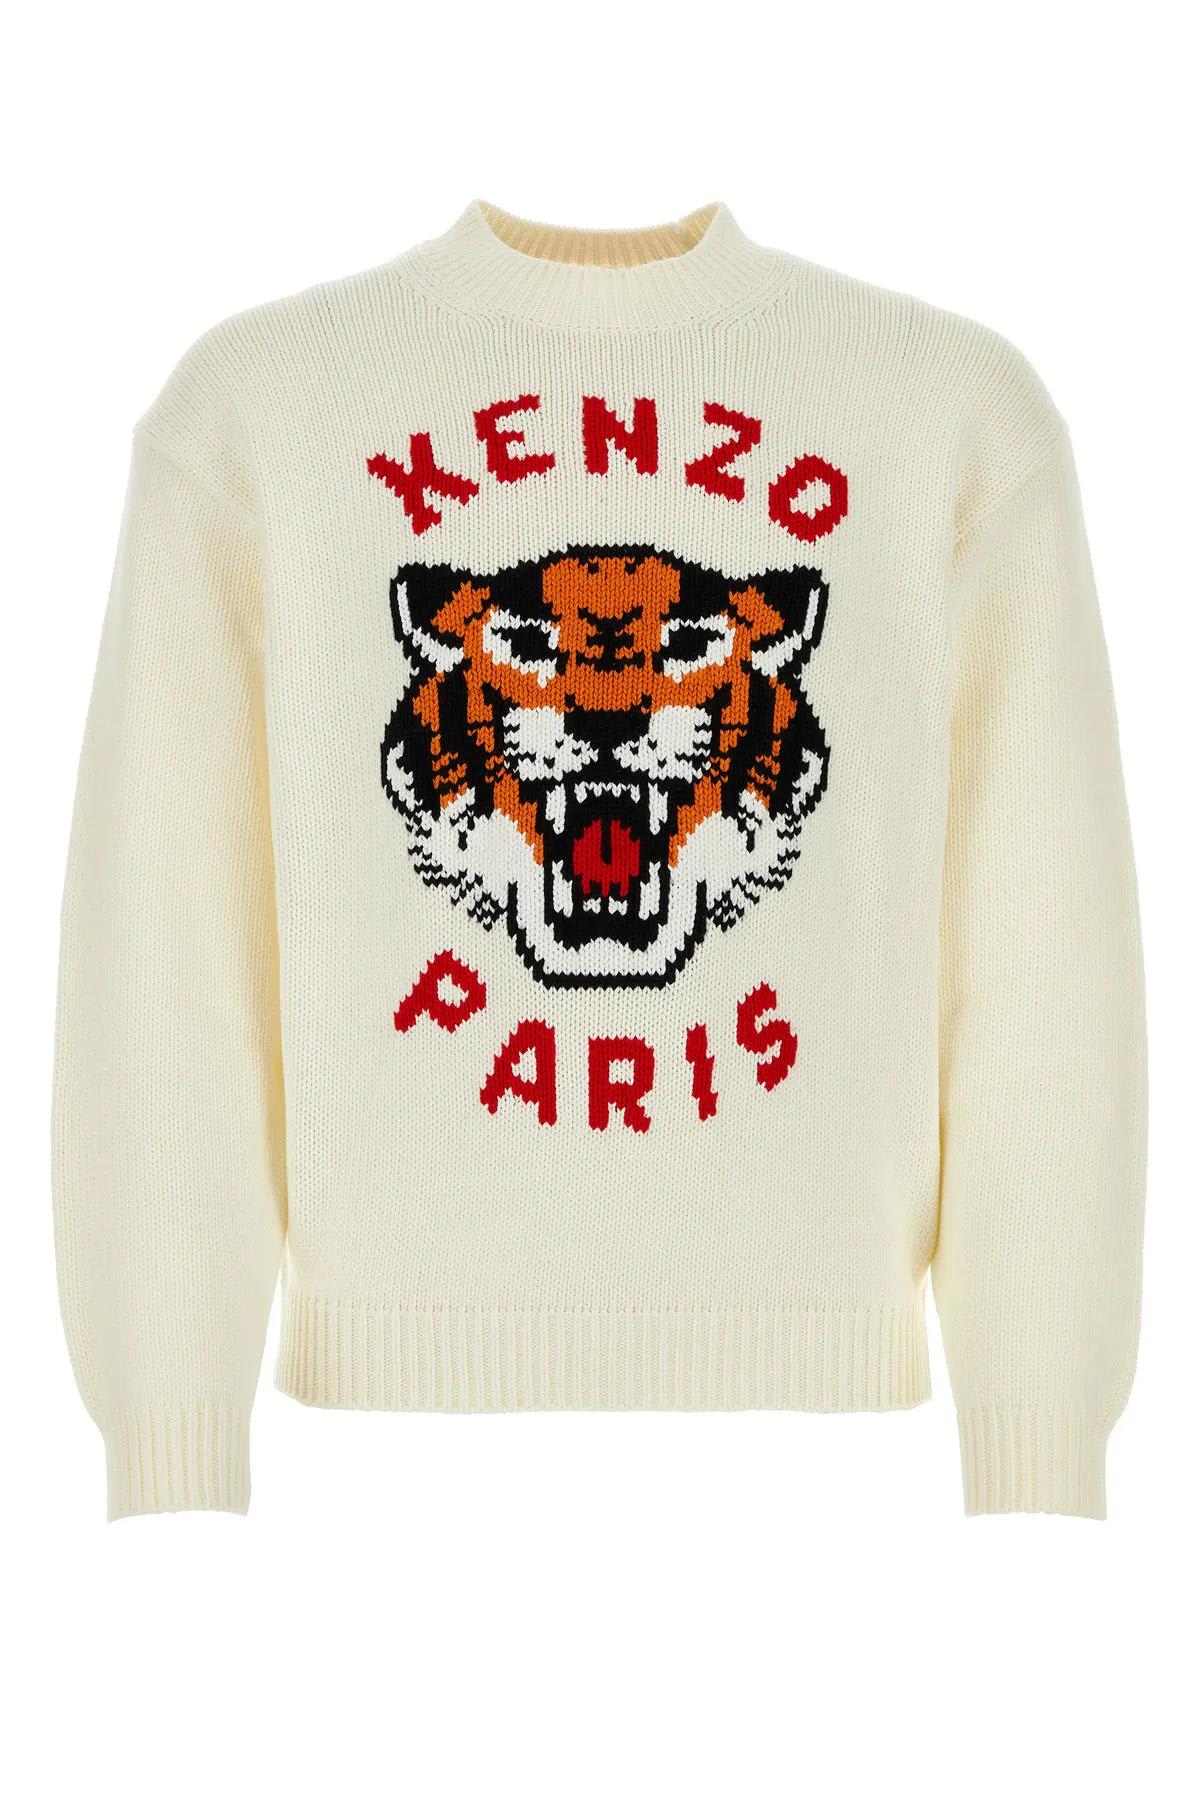 Kenzo Ivory Cotton Blend Jumper In Neutral